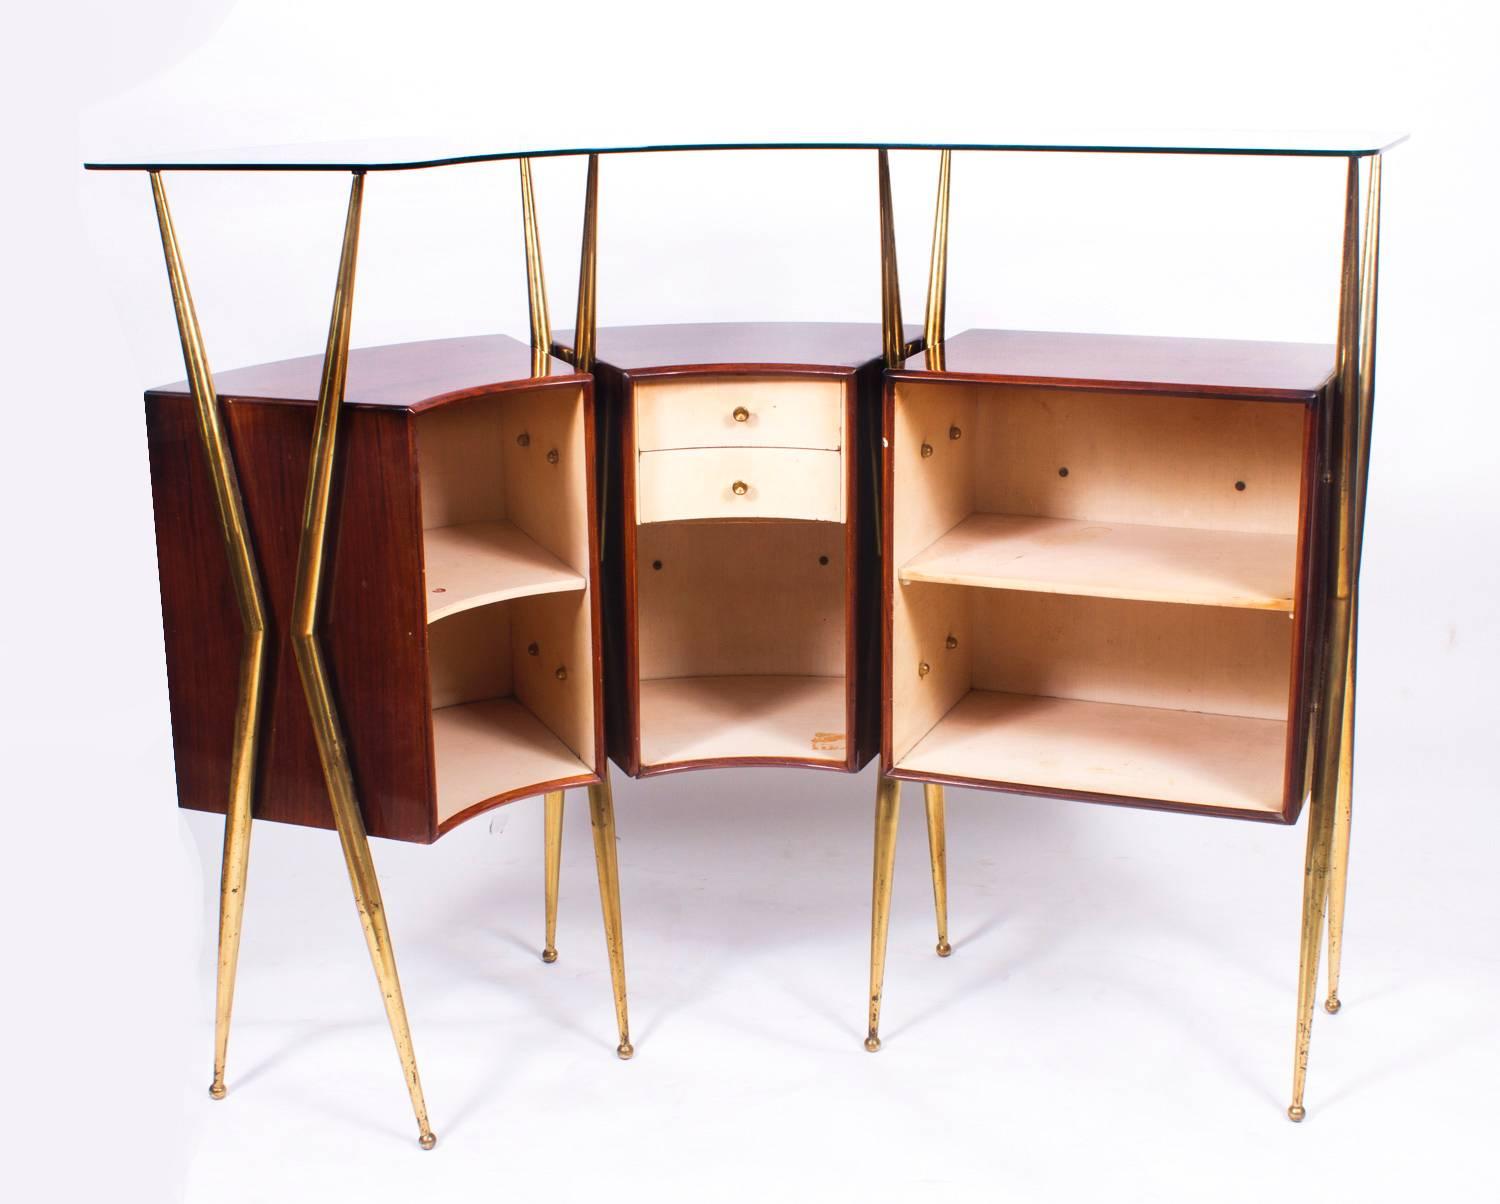 Italian Antique Cocktail Bar and Mirrored Cabinet, manner of Gio Ponti C1950